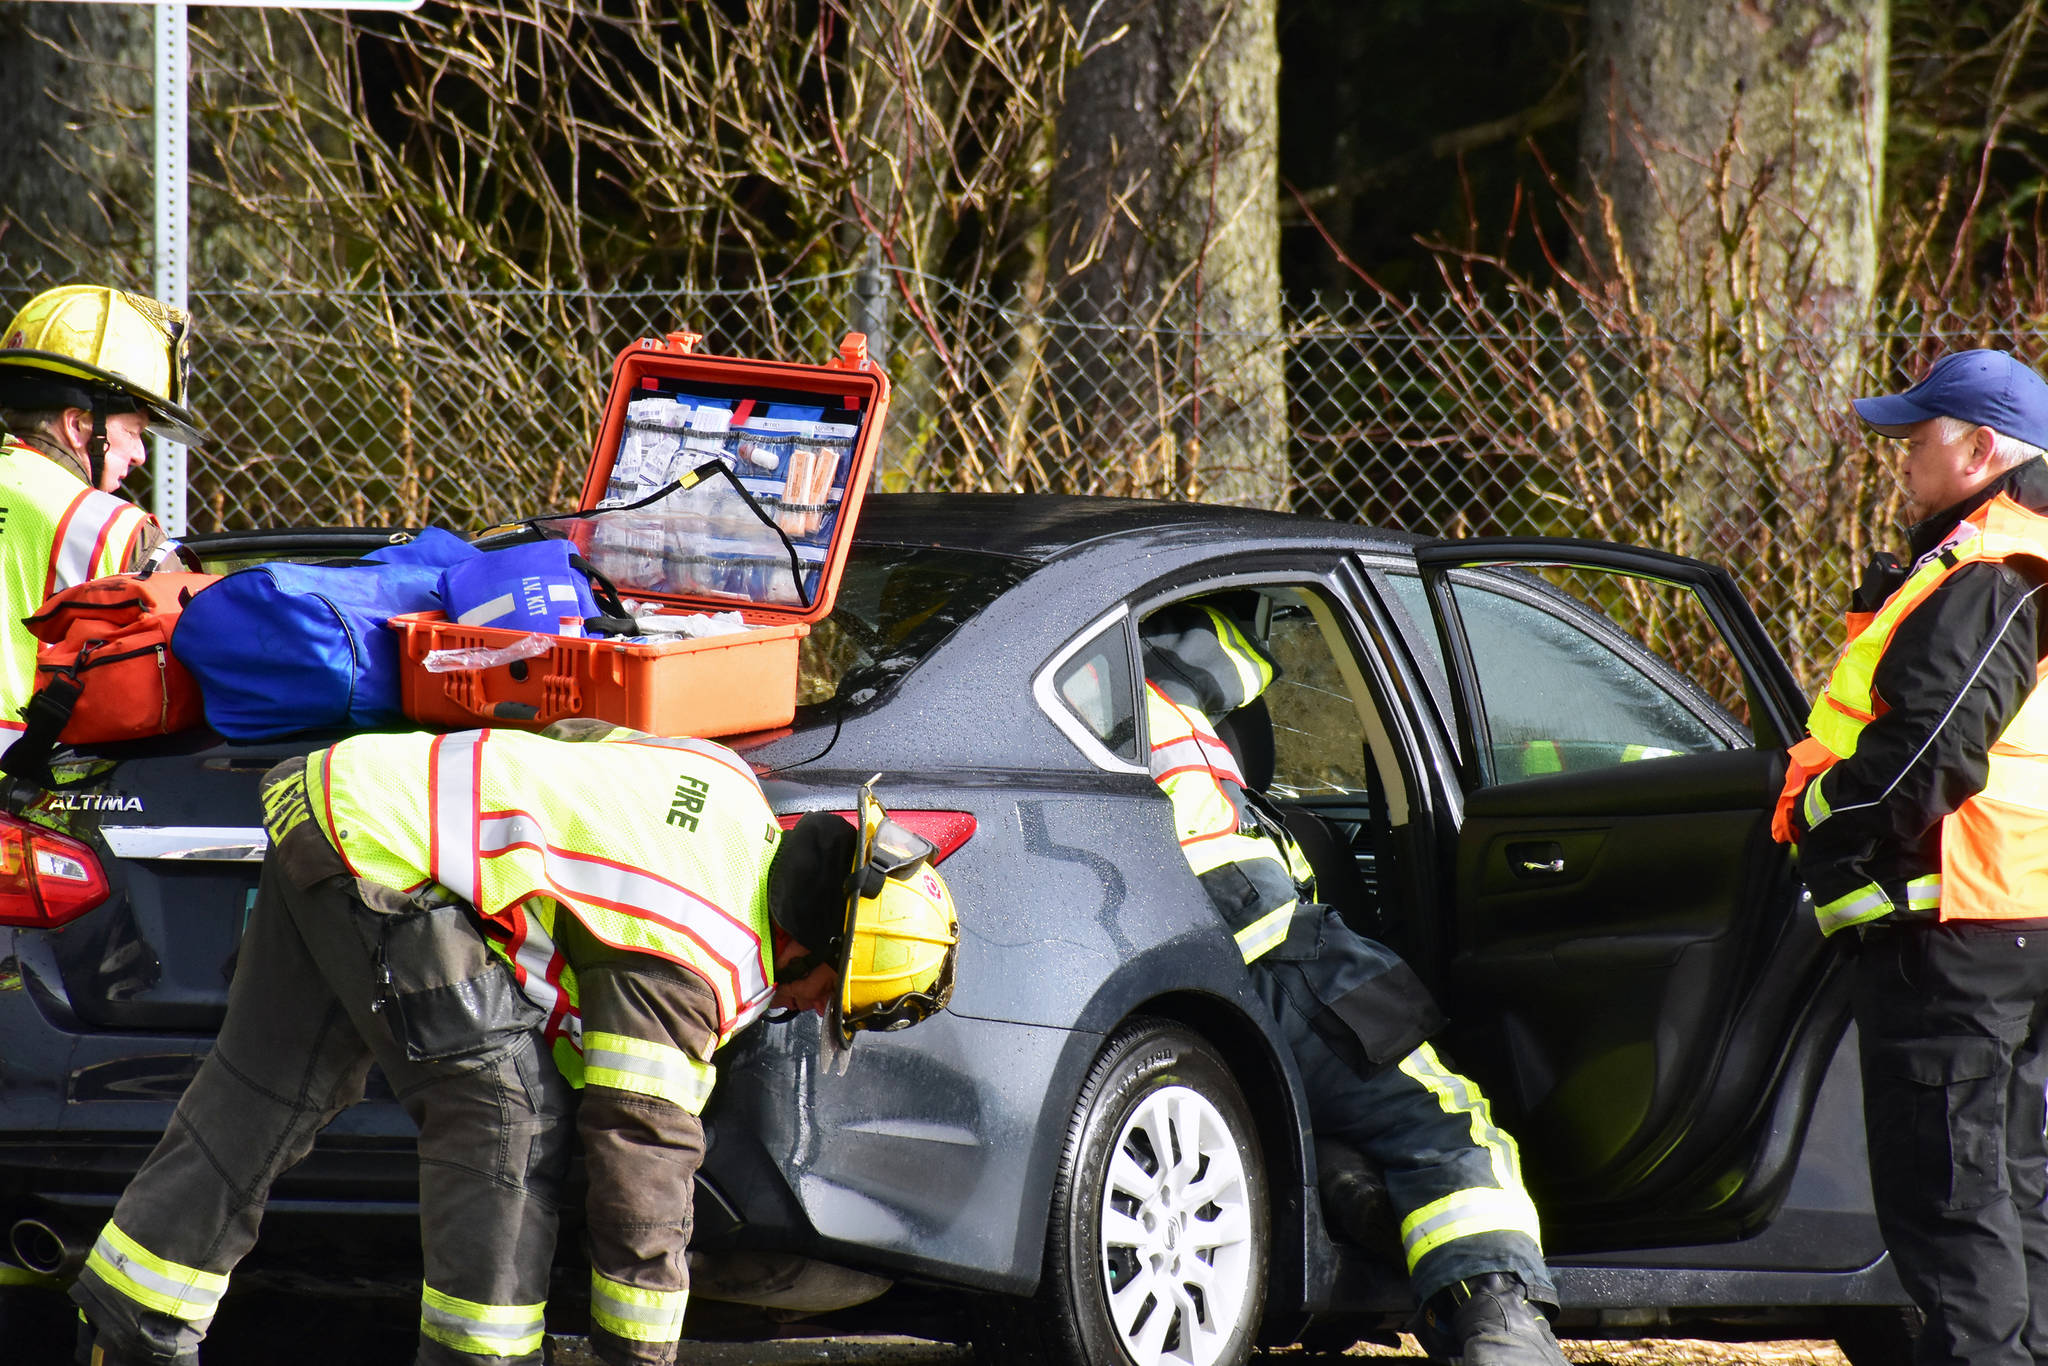 Capitol City Fire/Rescue respond to a car crash at the intersection of Egan Drive and Glacier Highway on Thursday, Feb. 27, 2020. (Peter Segall | Juneau Empire)